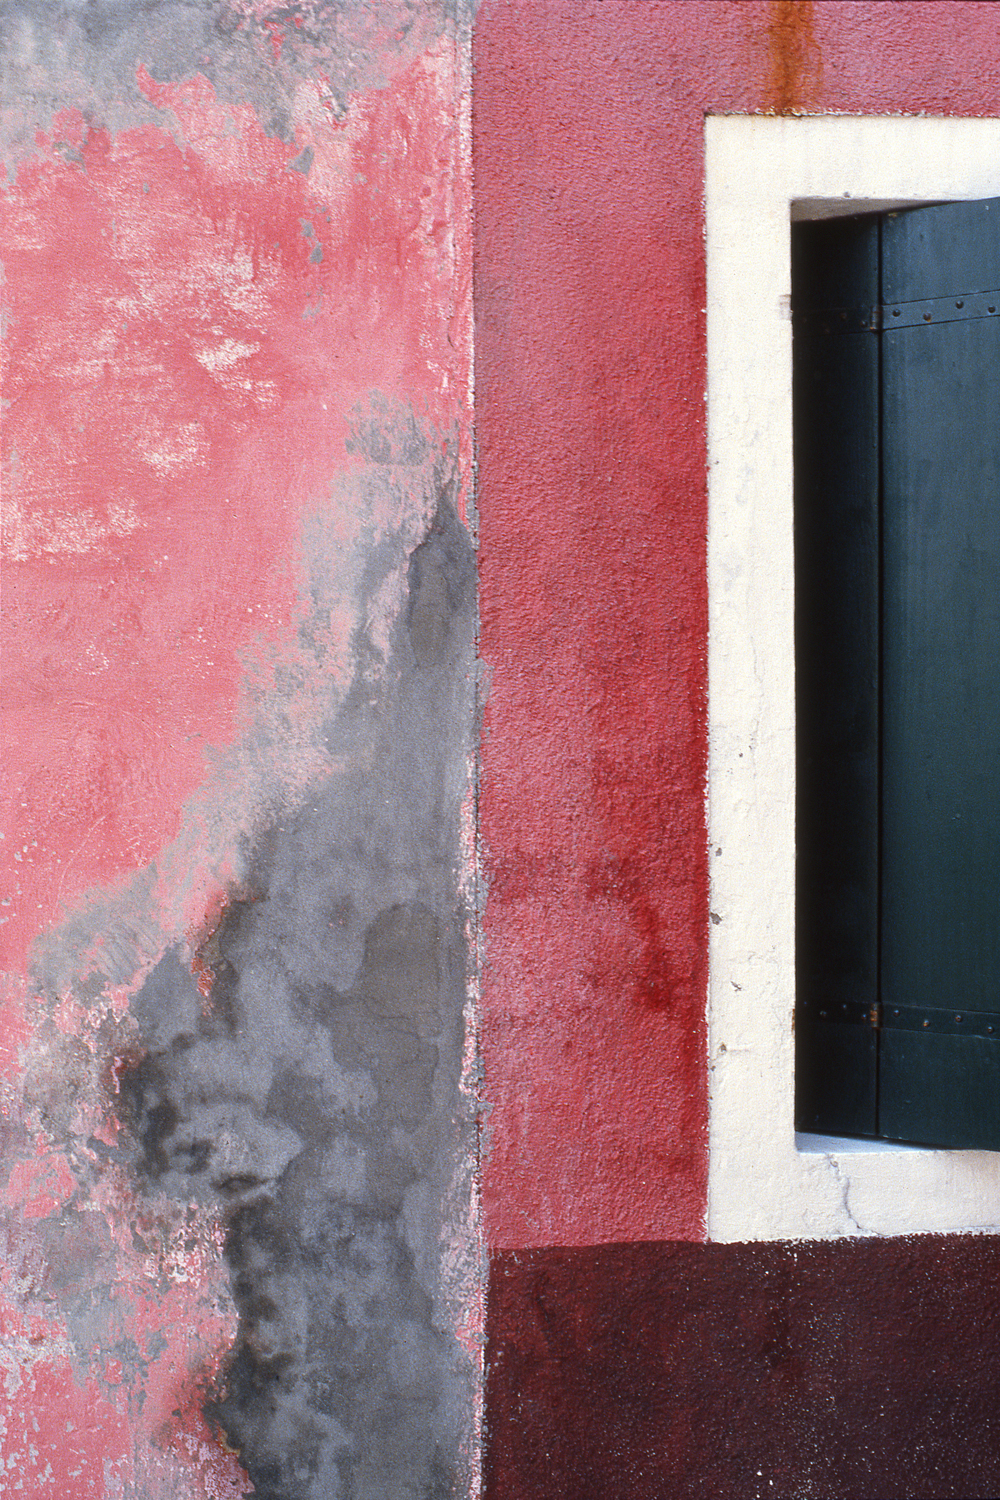   Pink and Grey Wall, Burano Italy, 1978 ,&nbsp;Cibachrome Print, 24 x 16cm, Edition of 10.&nbsp;&nbsp; &nbsp; &nbsp; &nbsp; &nbsp; &nbsp; &nbsp; &nbsp; &nbsp; &nbsp; &nbsp; &nbsp; &nbsp;  Exhibition:  Burano Colour Works ,&nbsp;Australian Centre for